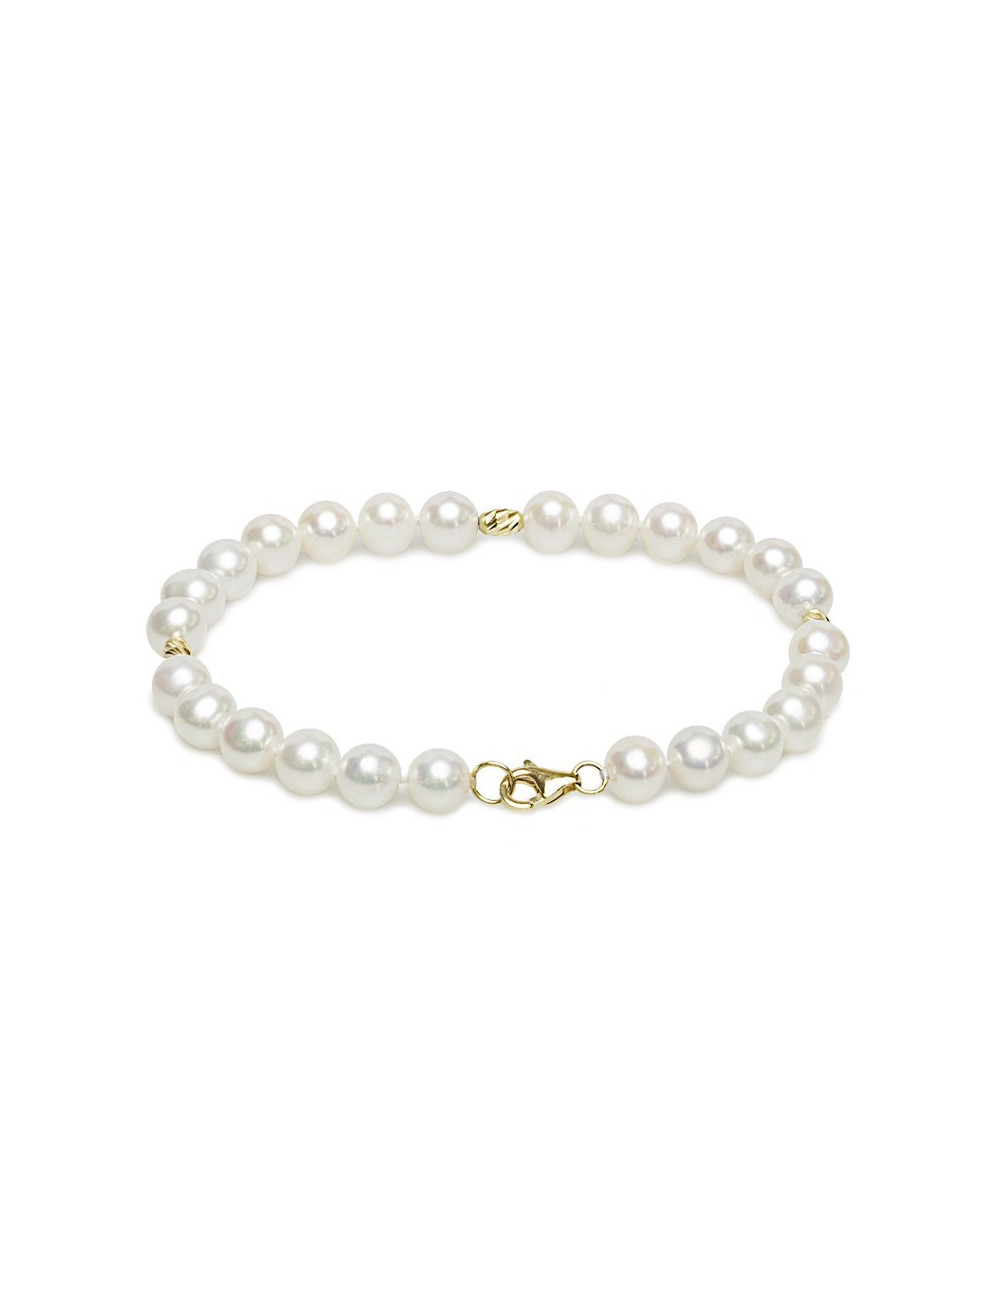 Bracelet of white, slightly oval pearls with gold elements BO67BAG18